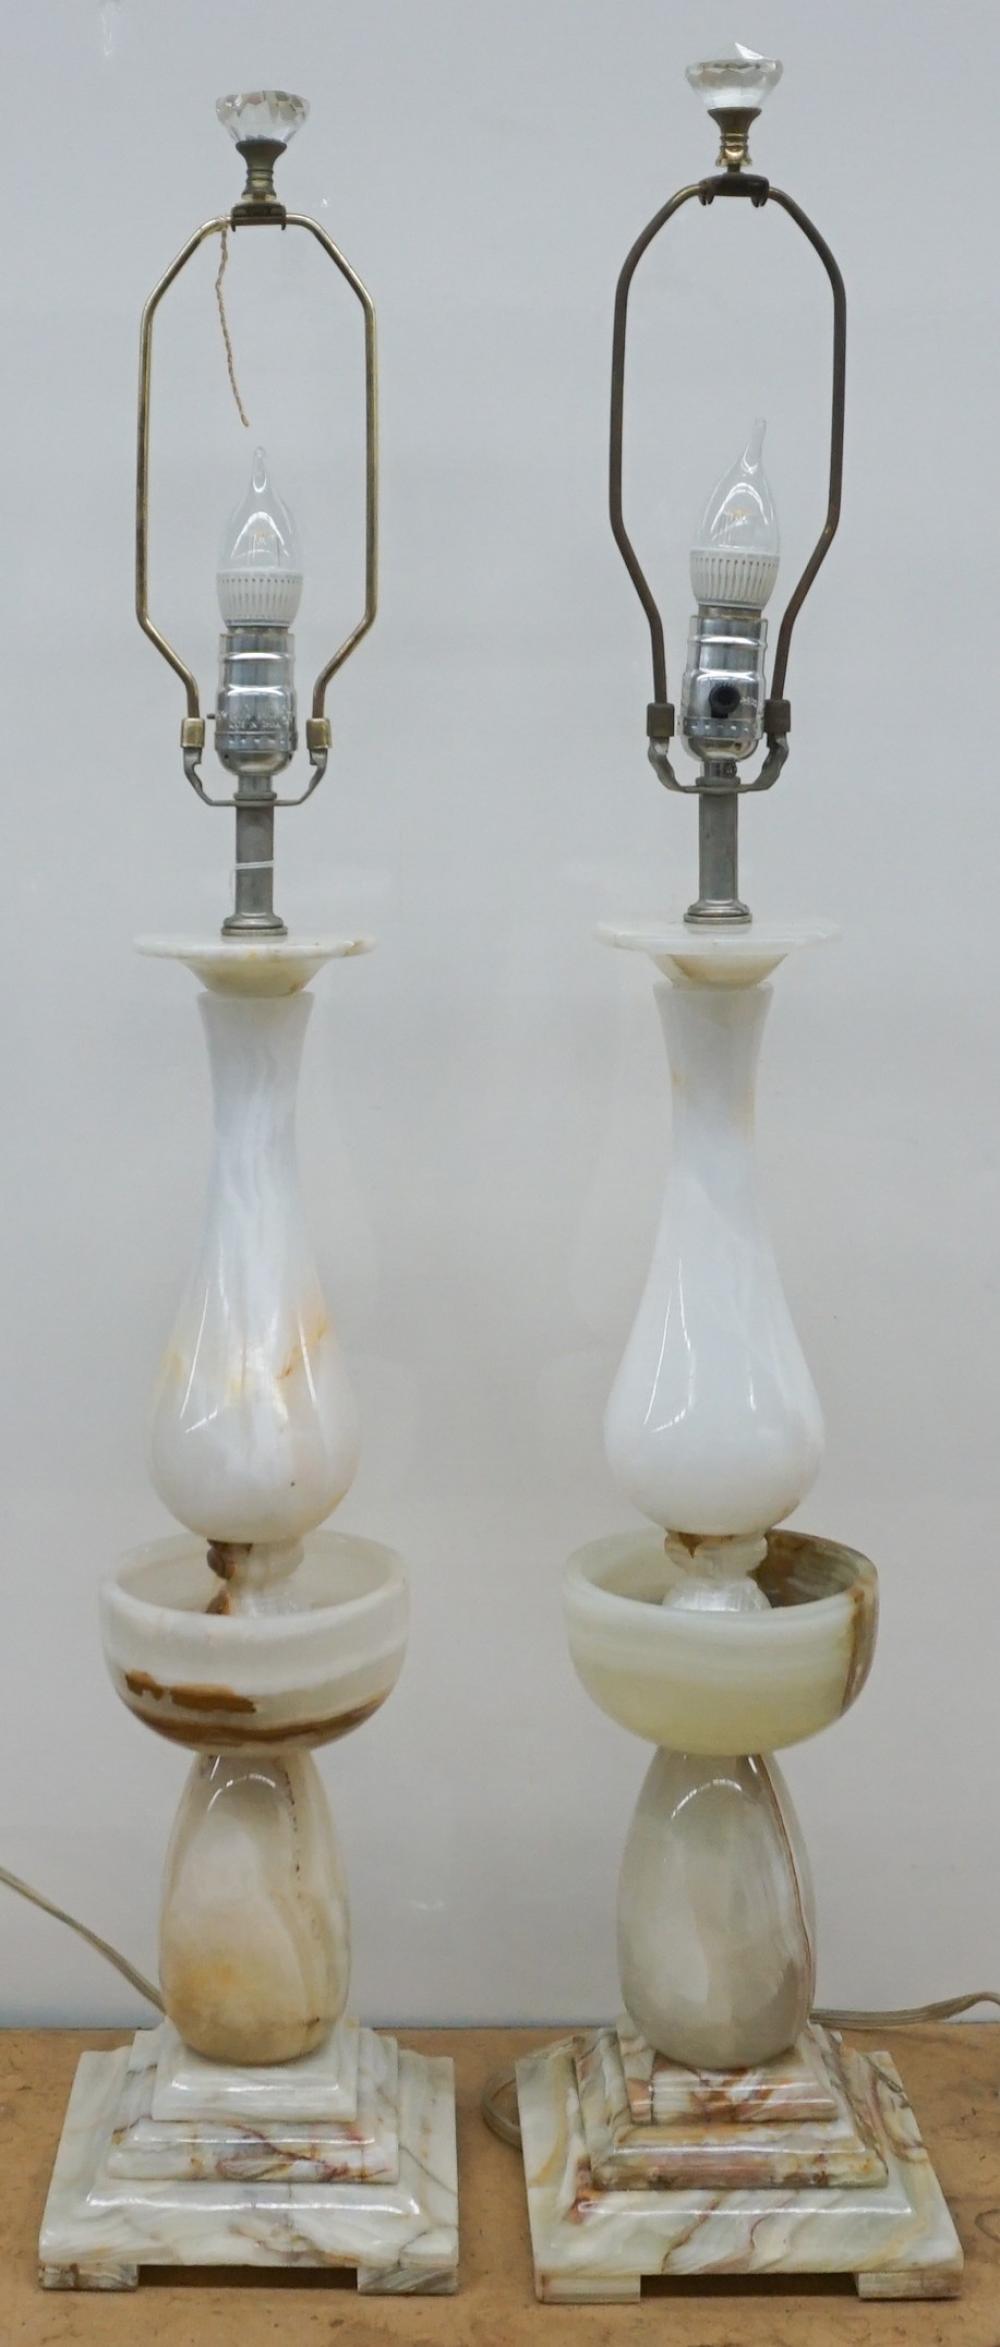 PAIR ONYX TABLE LAMPS H 35 IN  32fcd3